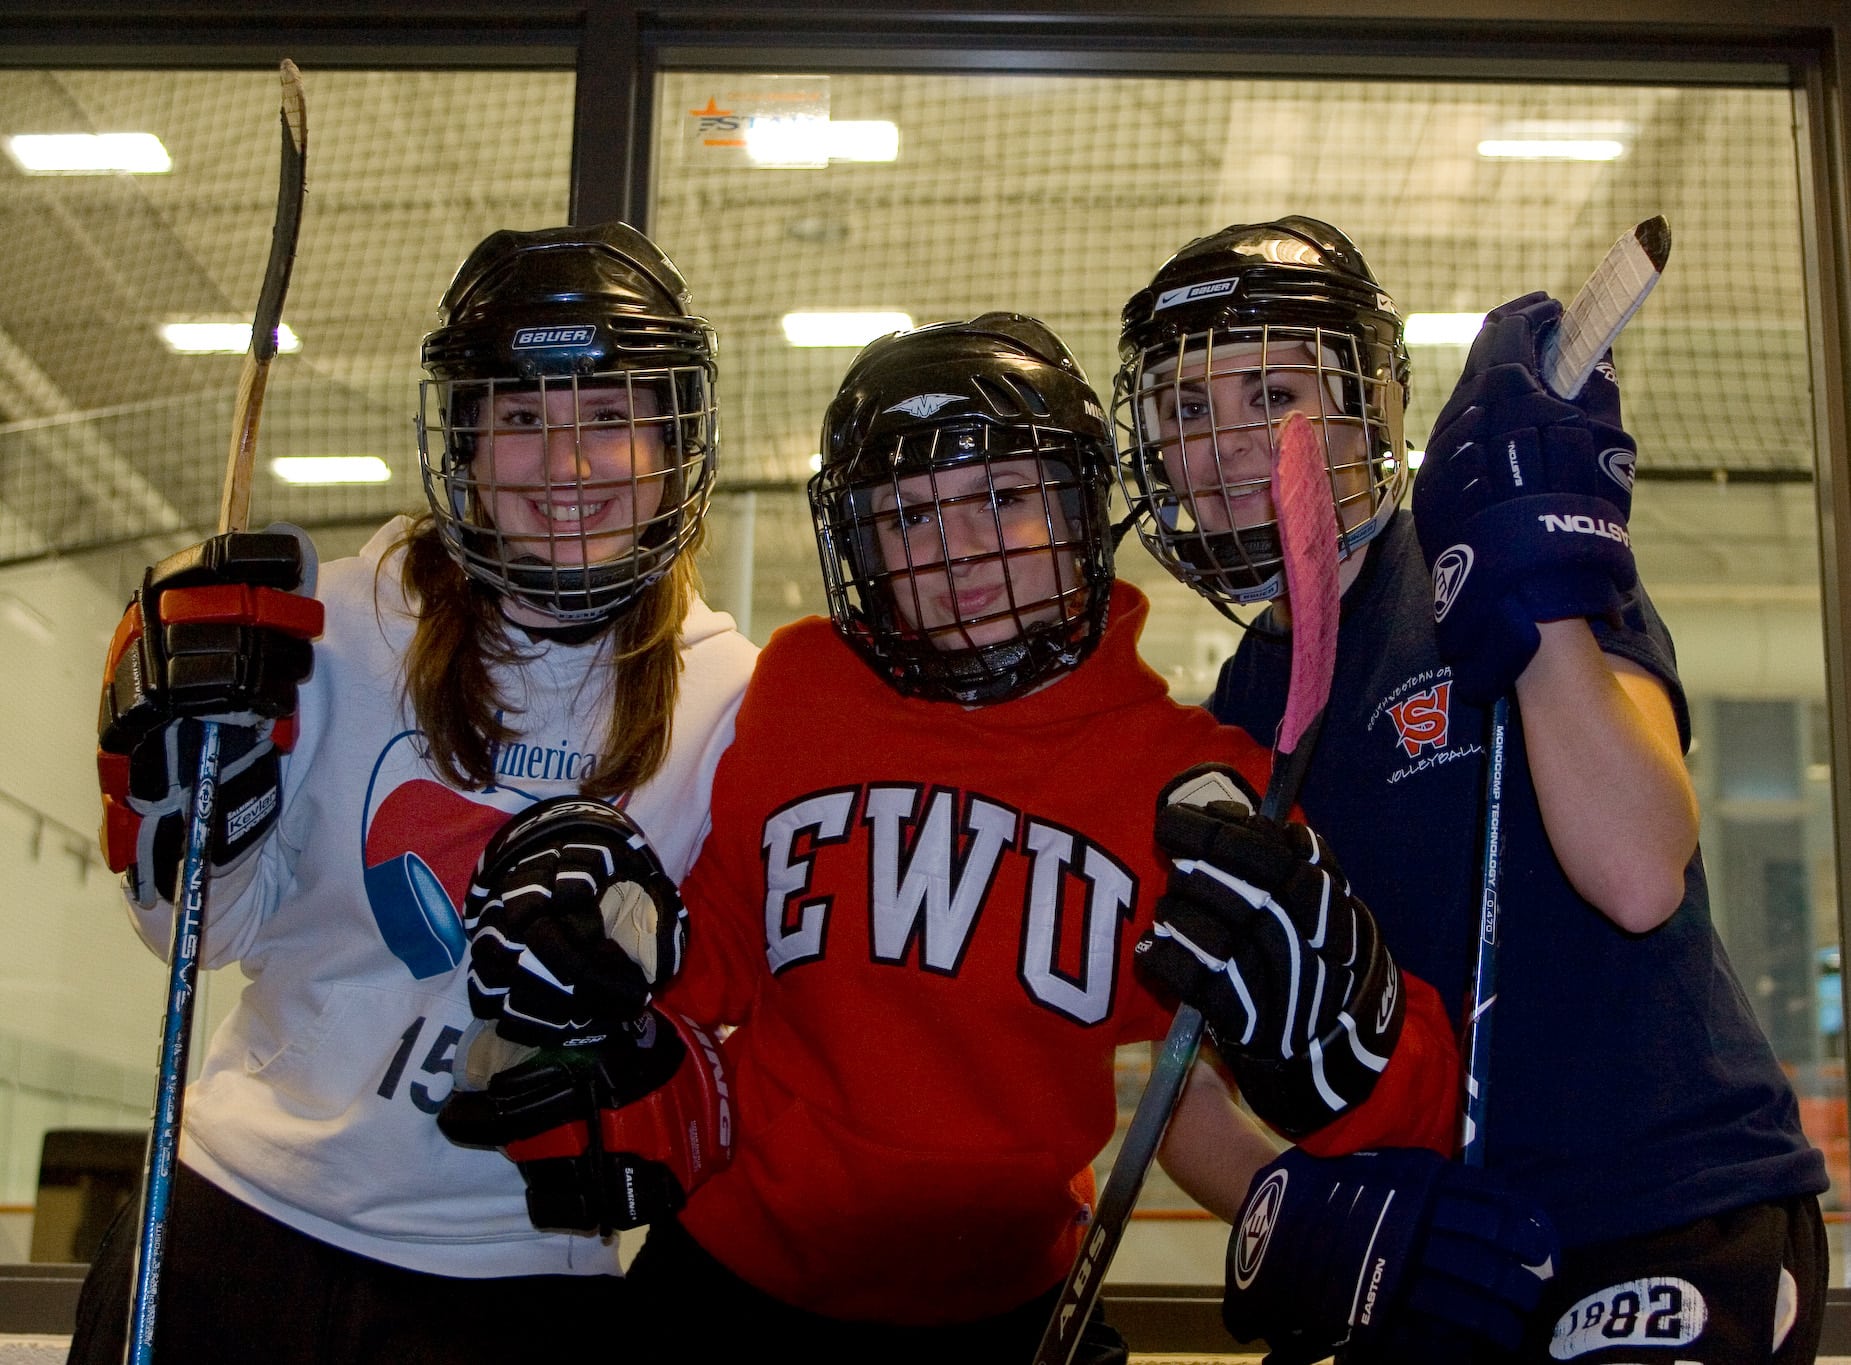 Baitlyn, Kayla, and Daitlin pose, wearing hockey gear, in front of the rec center's ice rink